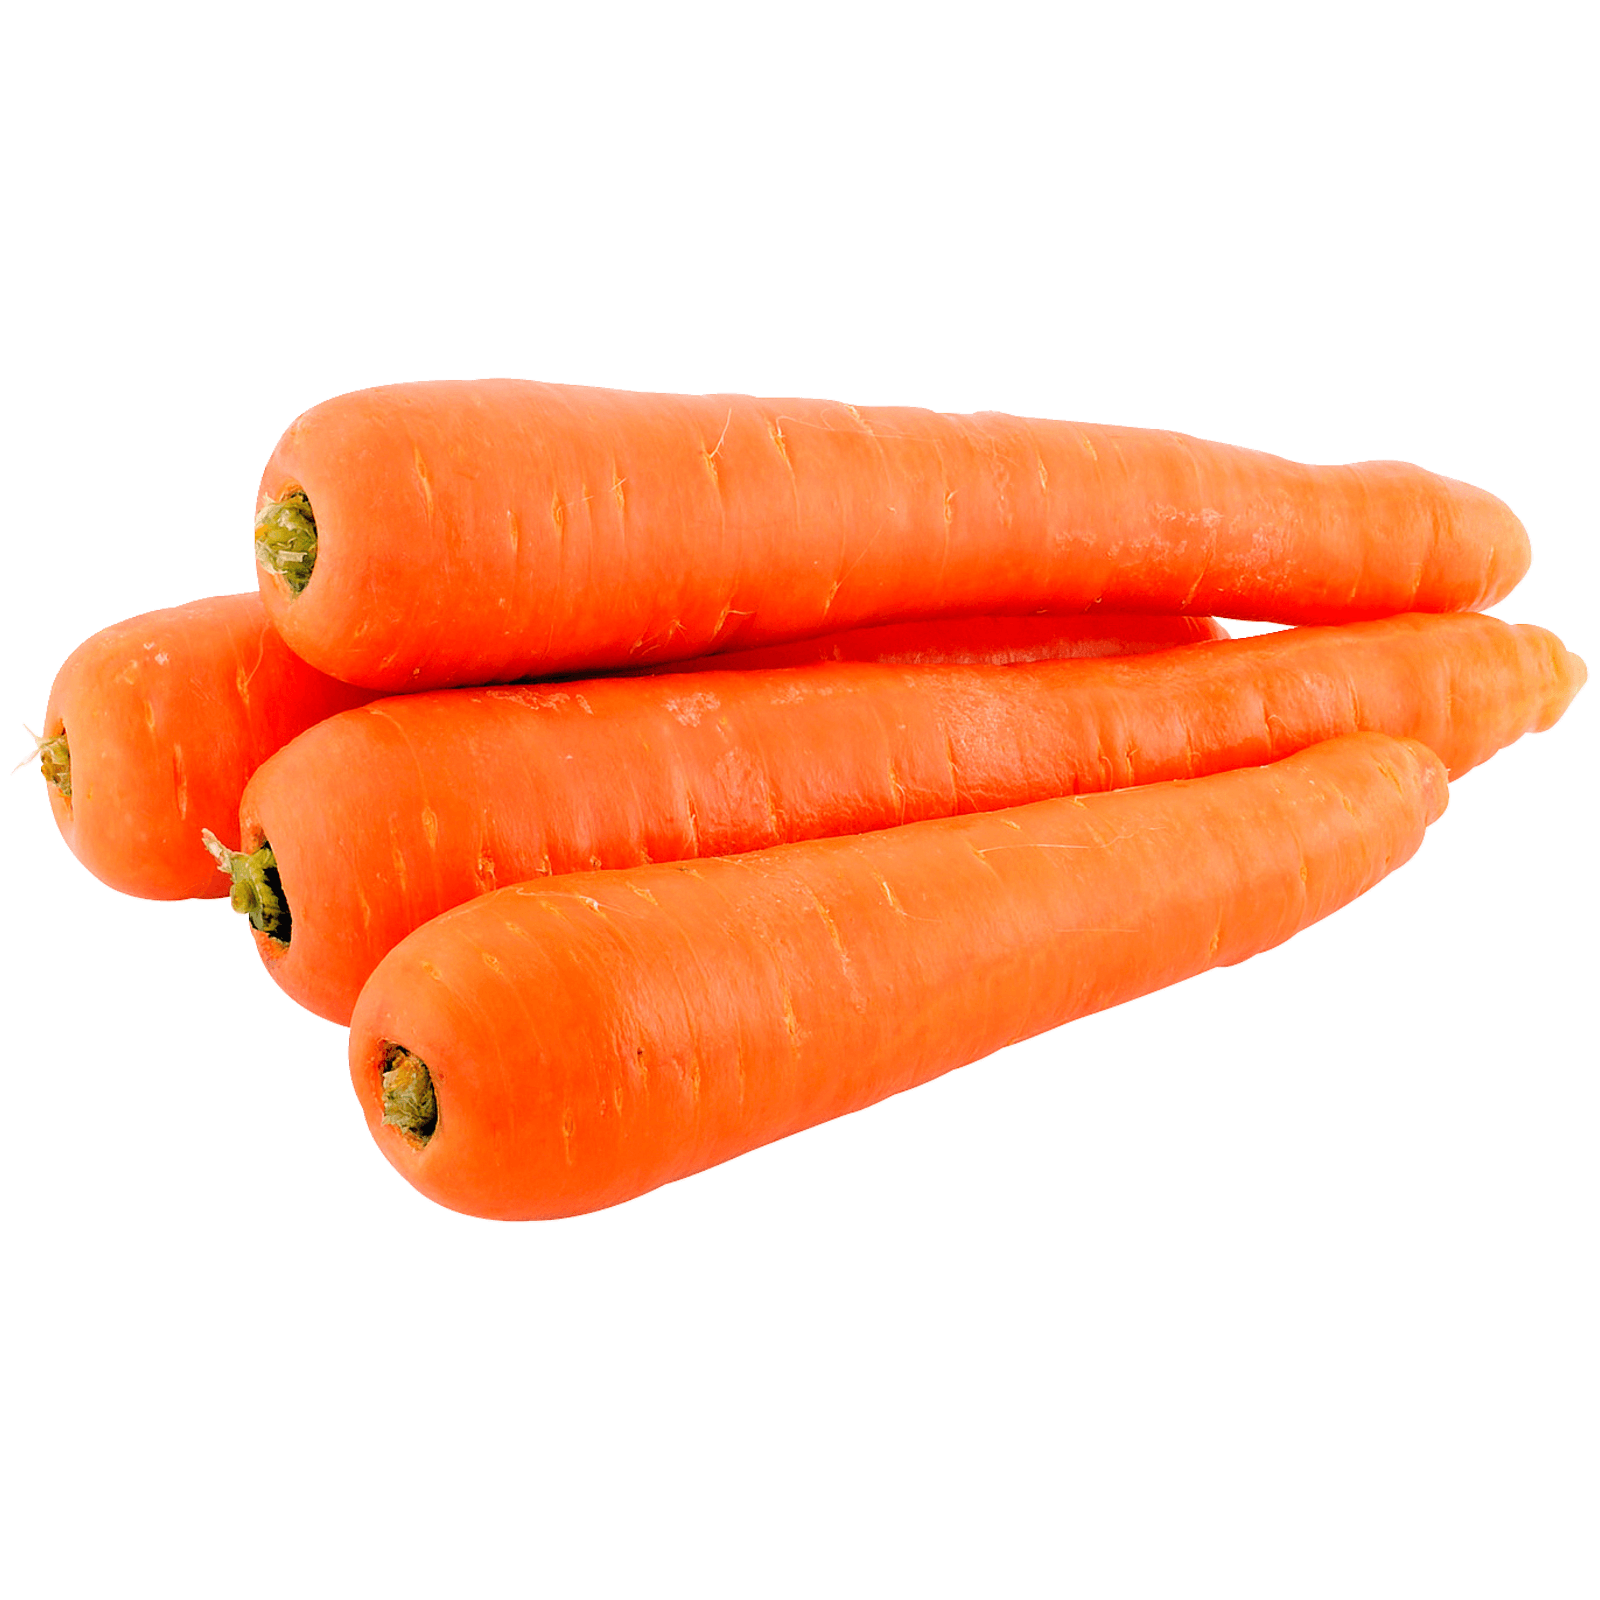 Download Carrot Png Images | PNG & GIF BASE